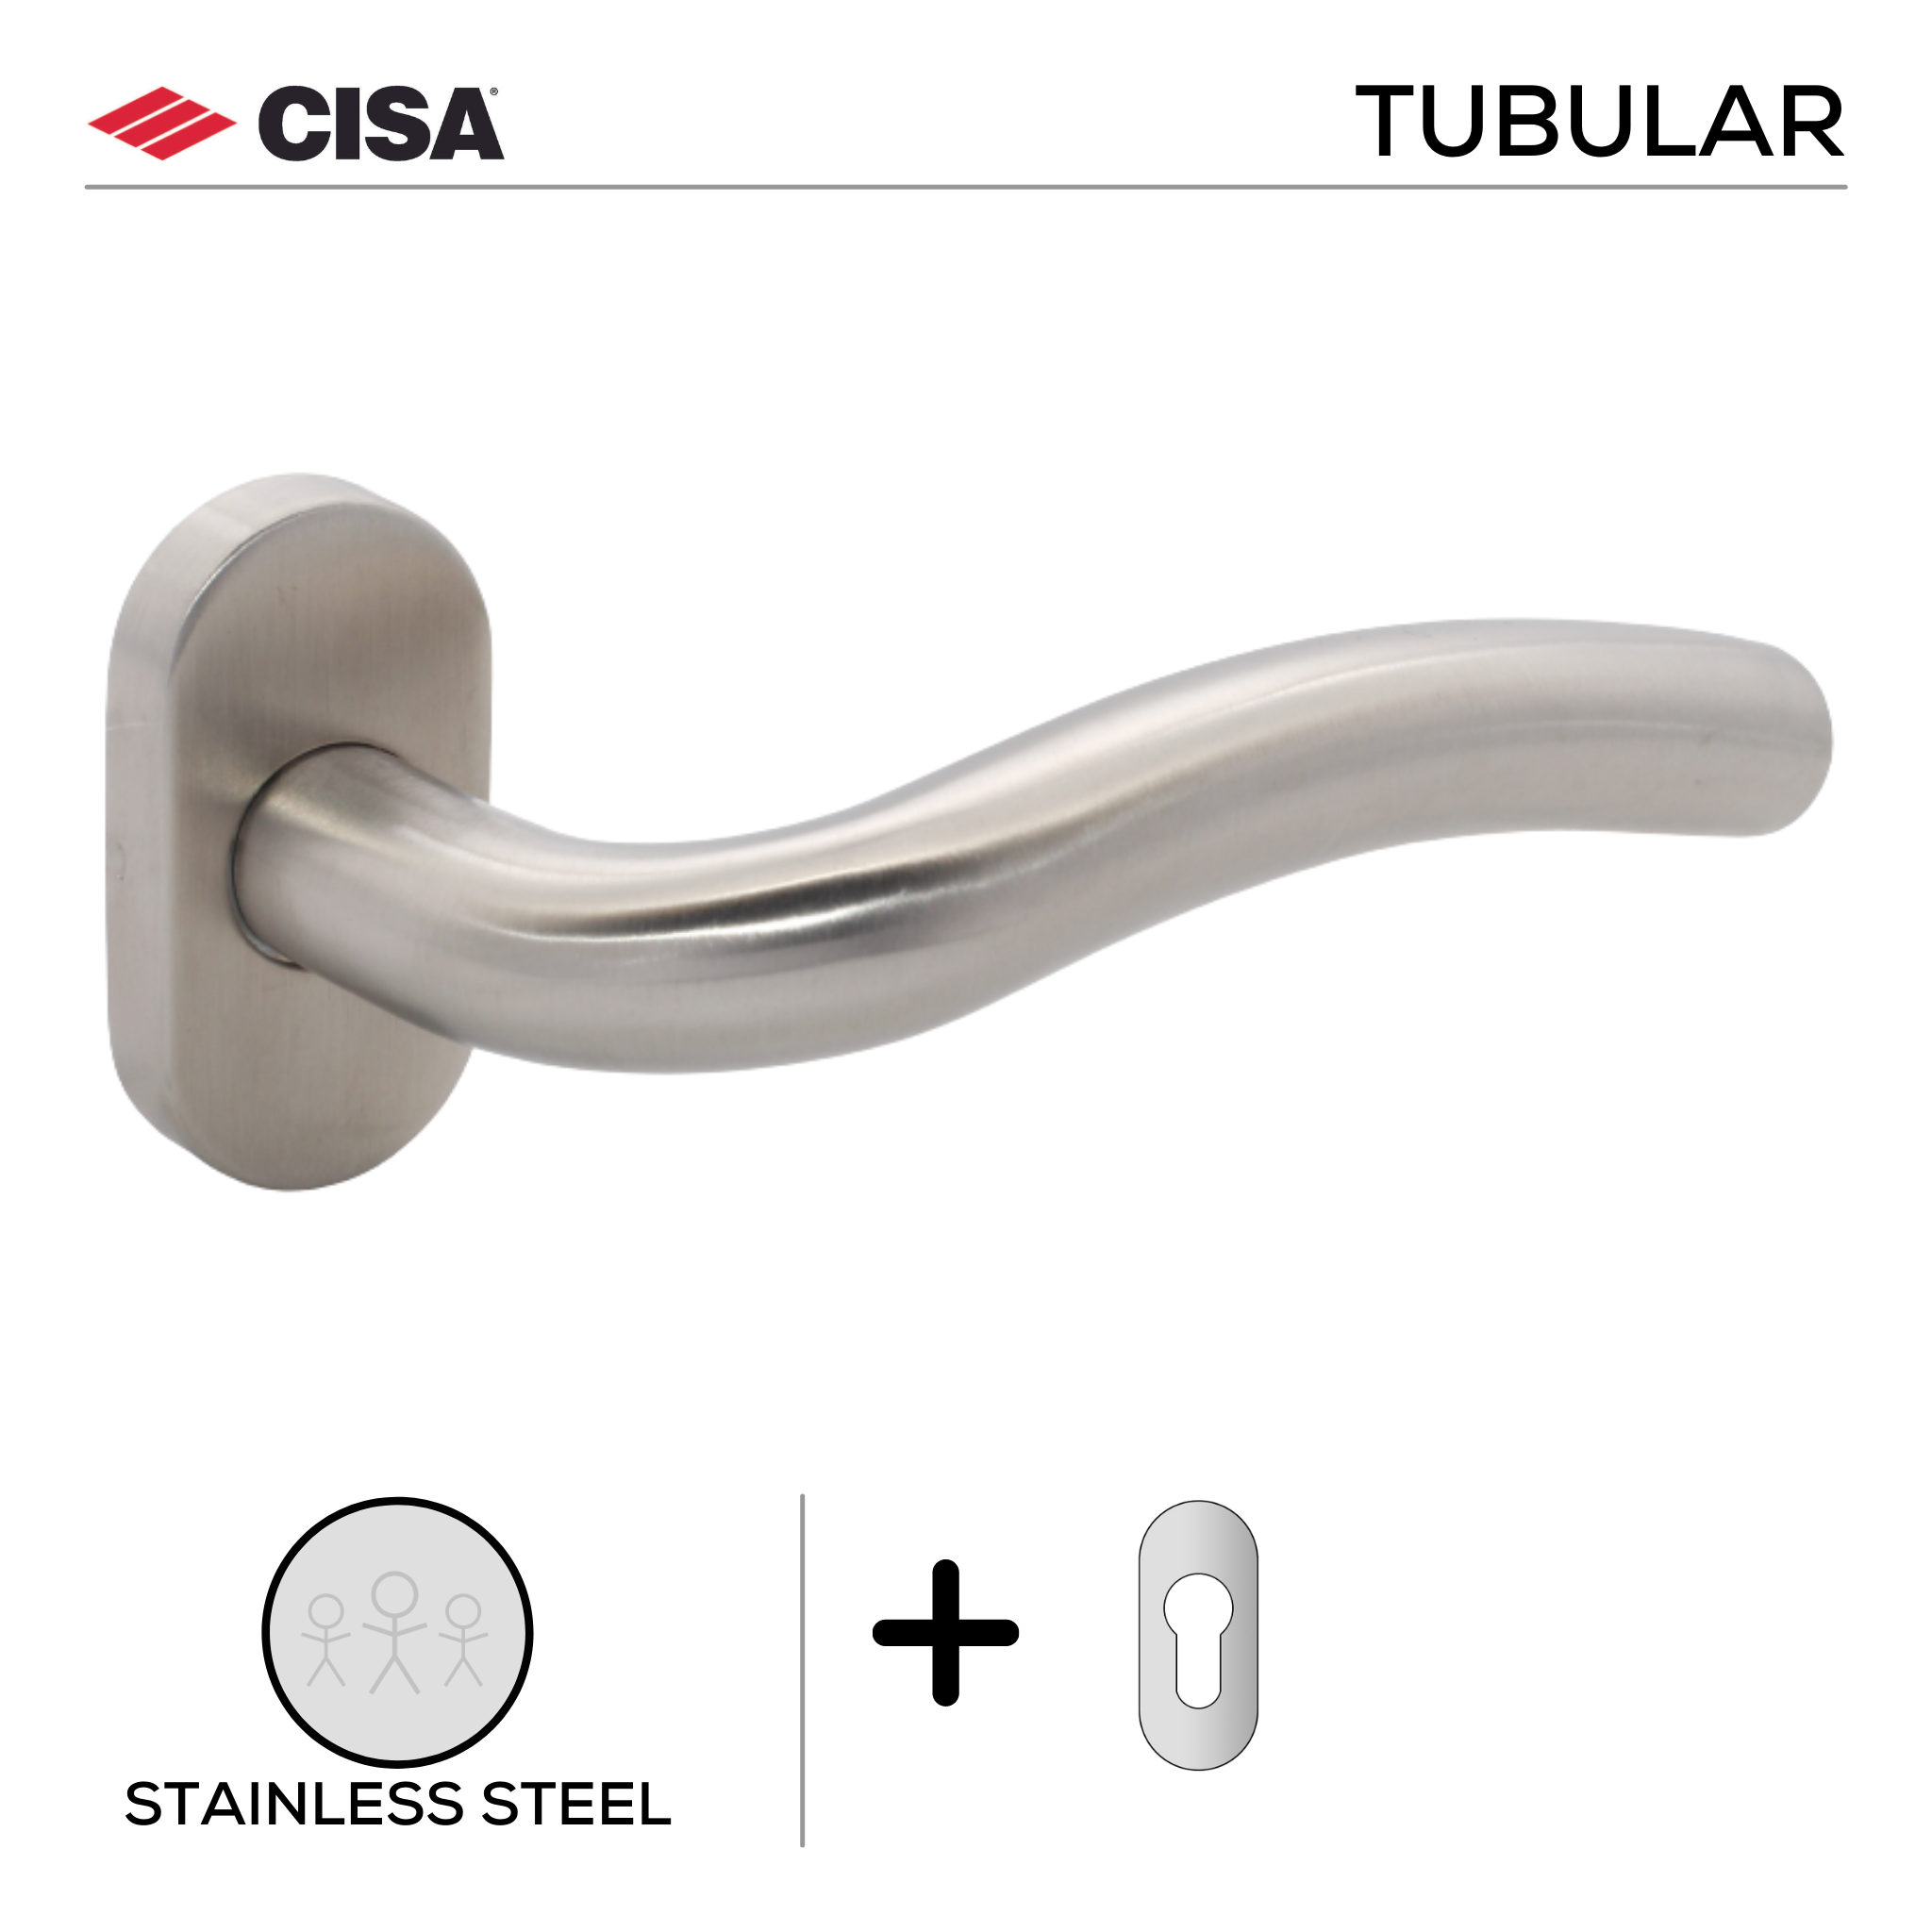 FT12.O._.SS, Lever Handles, Tubular, On Oval Rose, With Cylinder Escutcheons, Stainless Steel, CISA